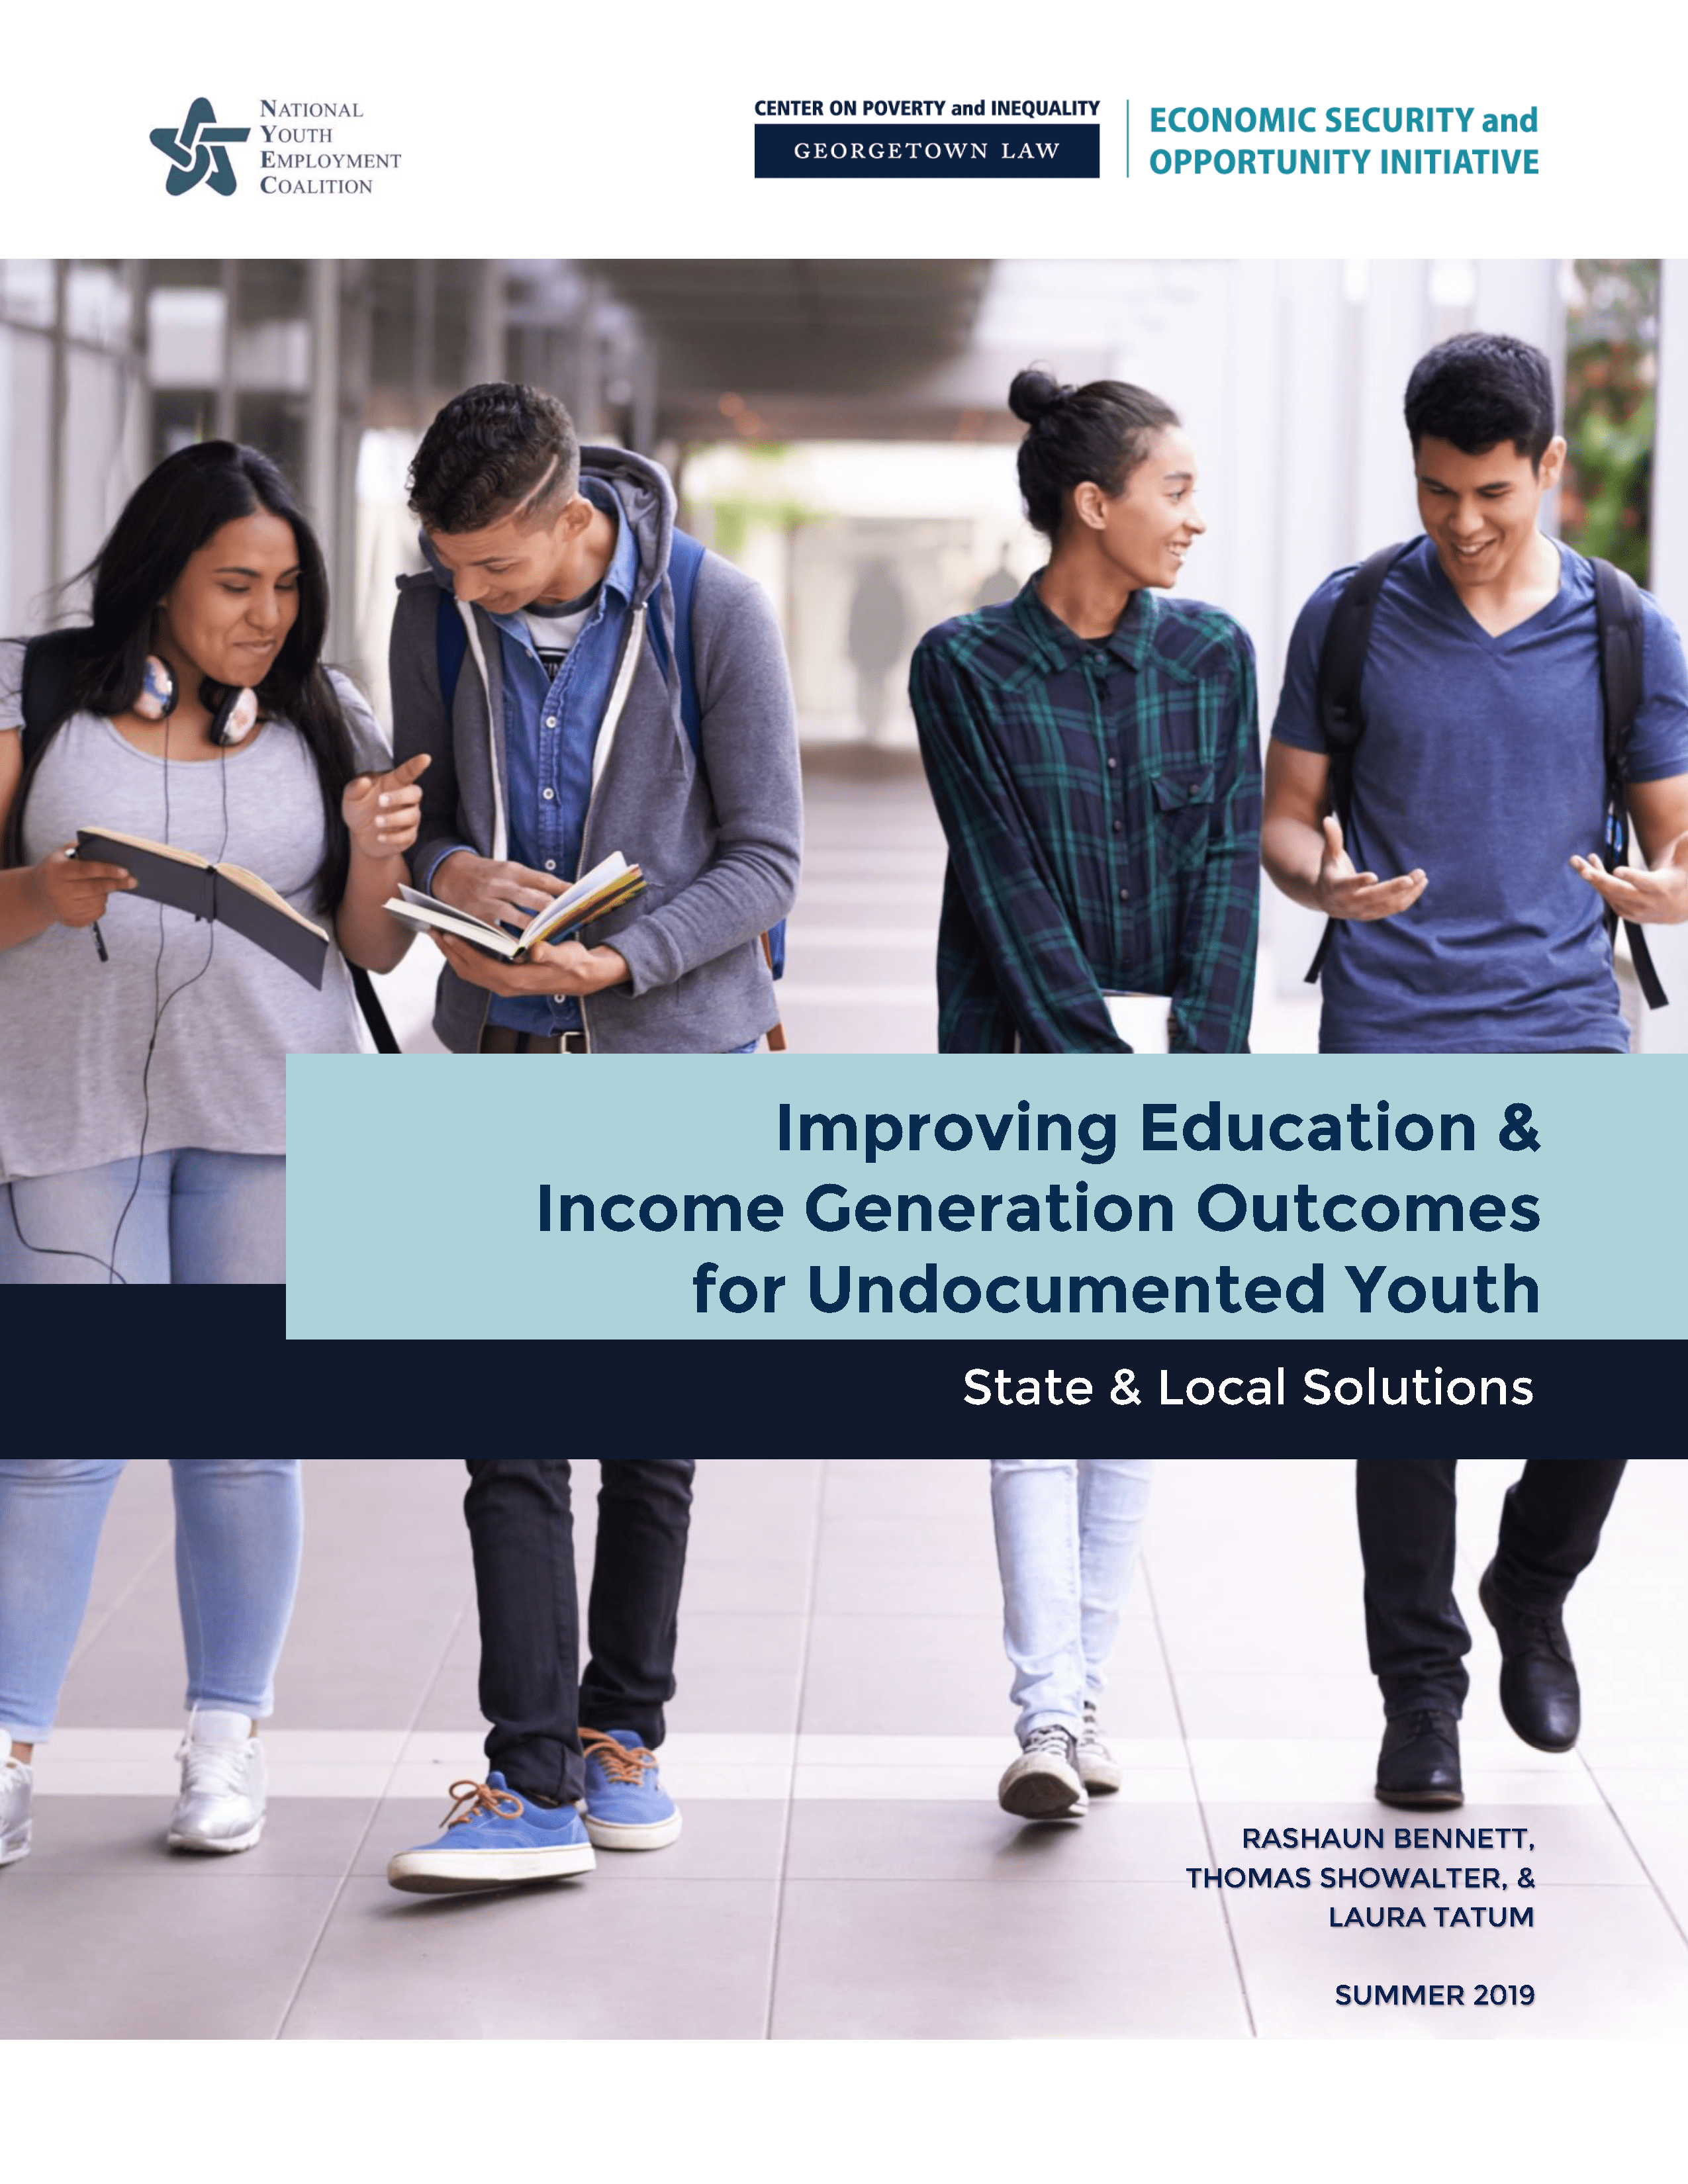 Improving Education & Income Generation Outcomes for Undocumented Youth